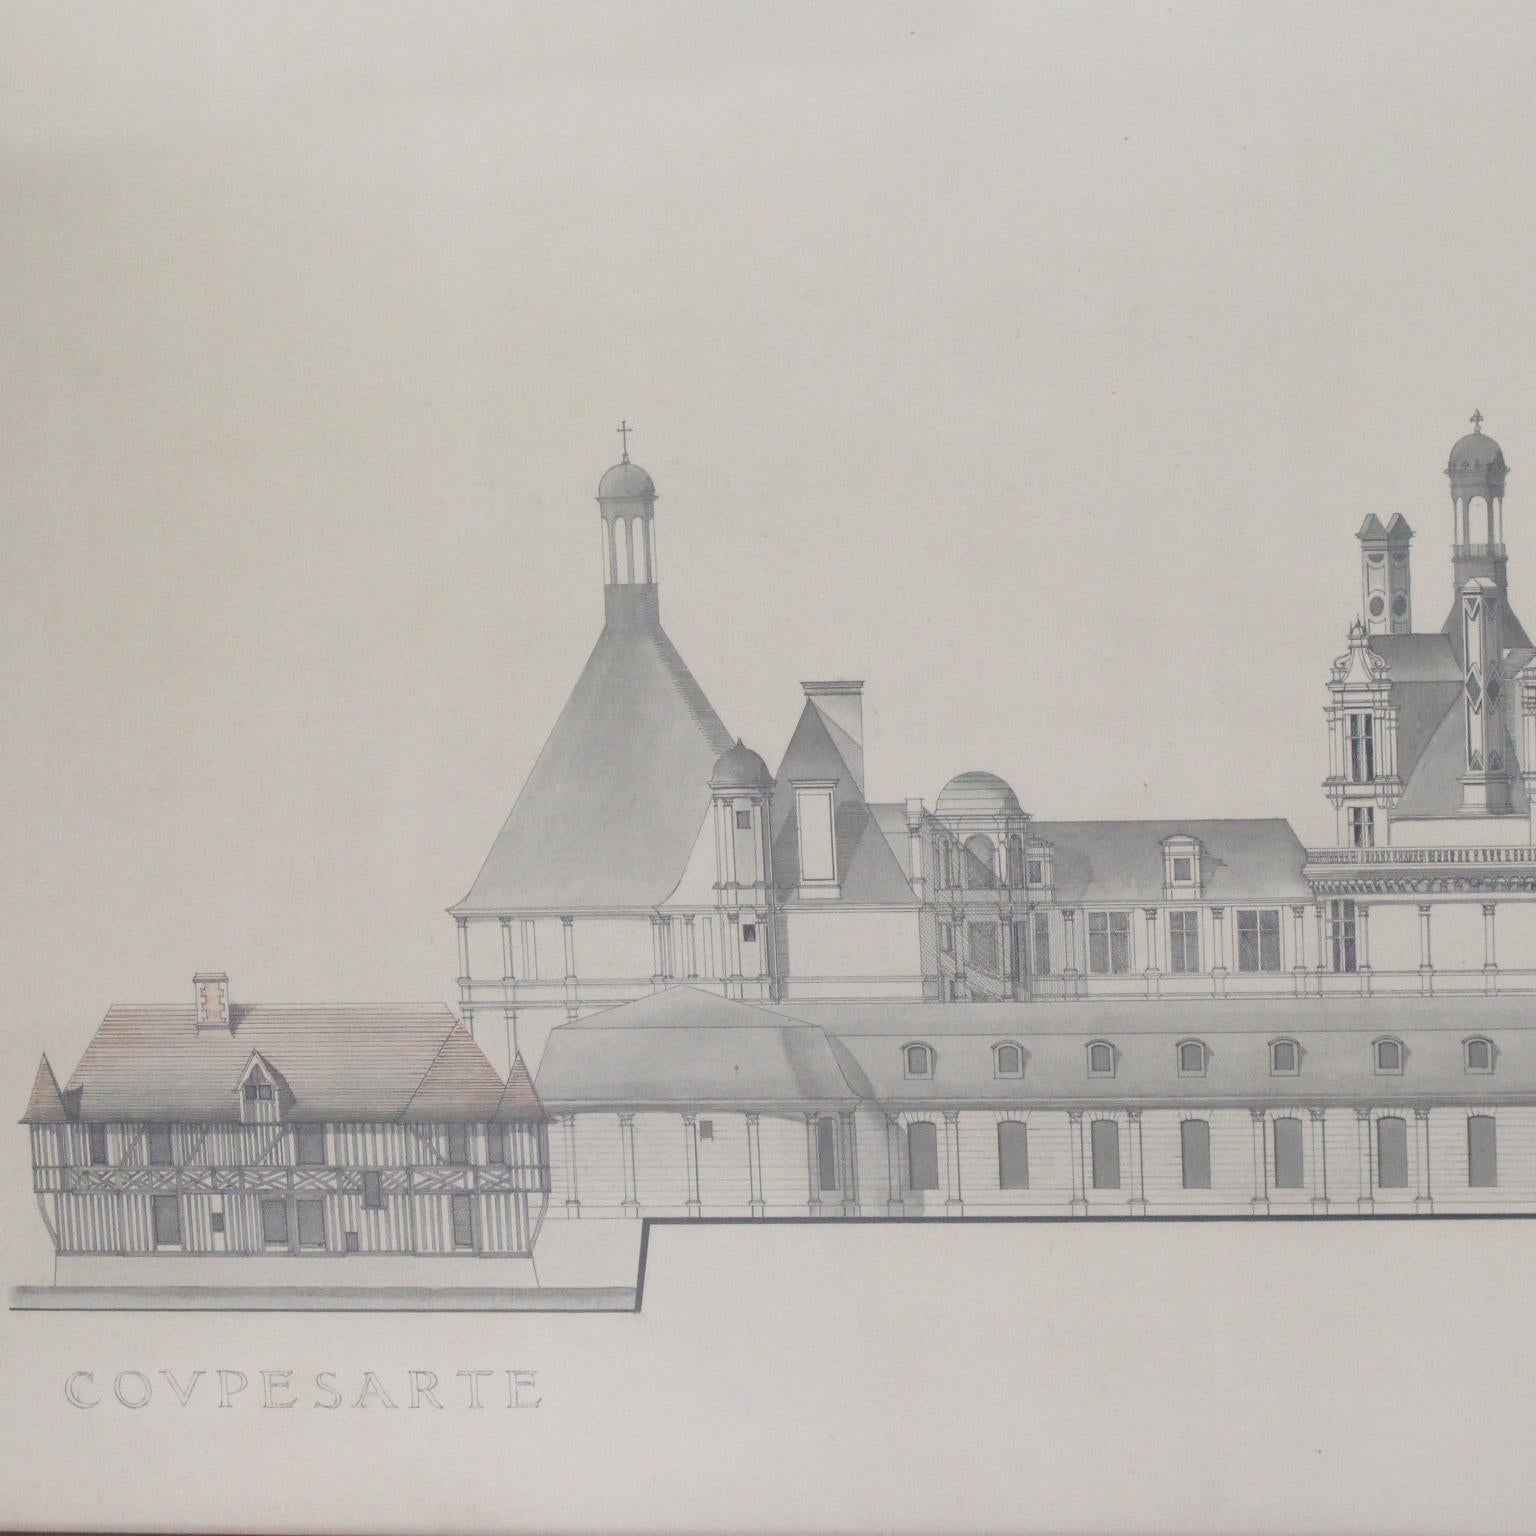 This is an oversized astonishing architectural study of Renaissance buildings in France.
These sketches of 